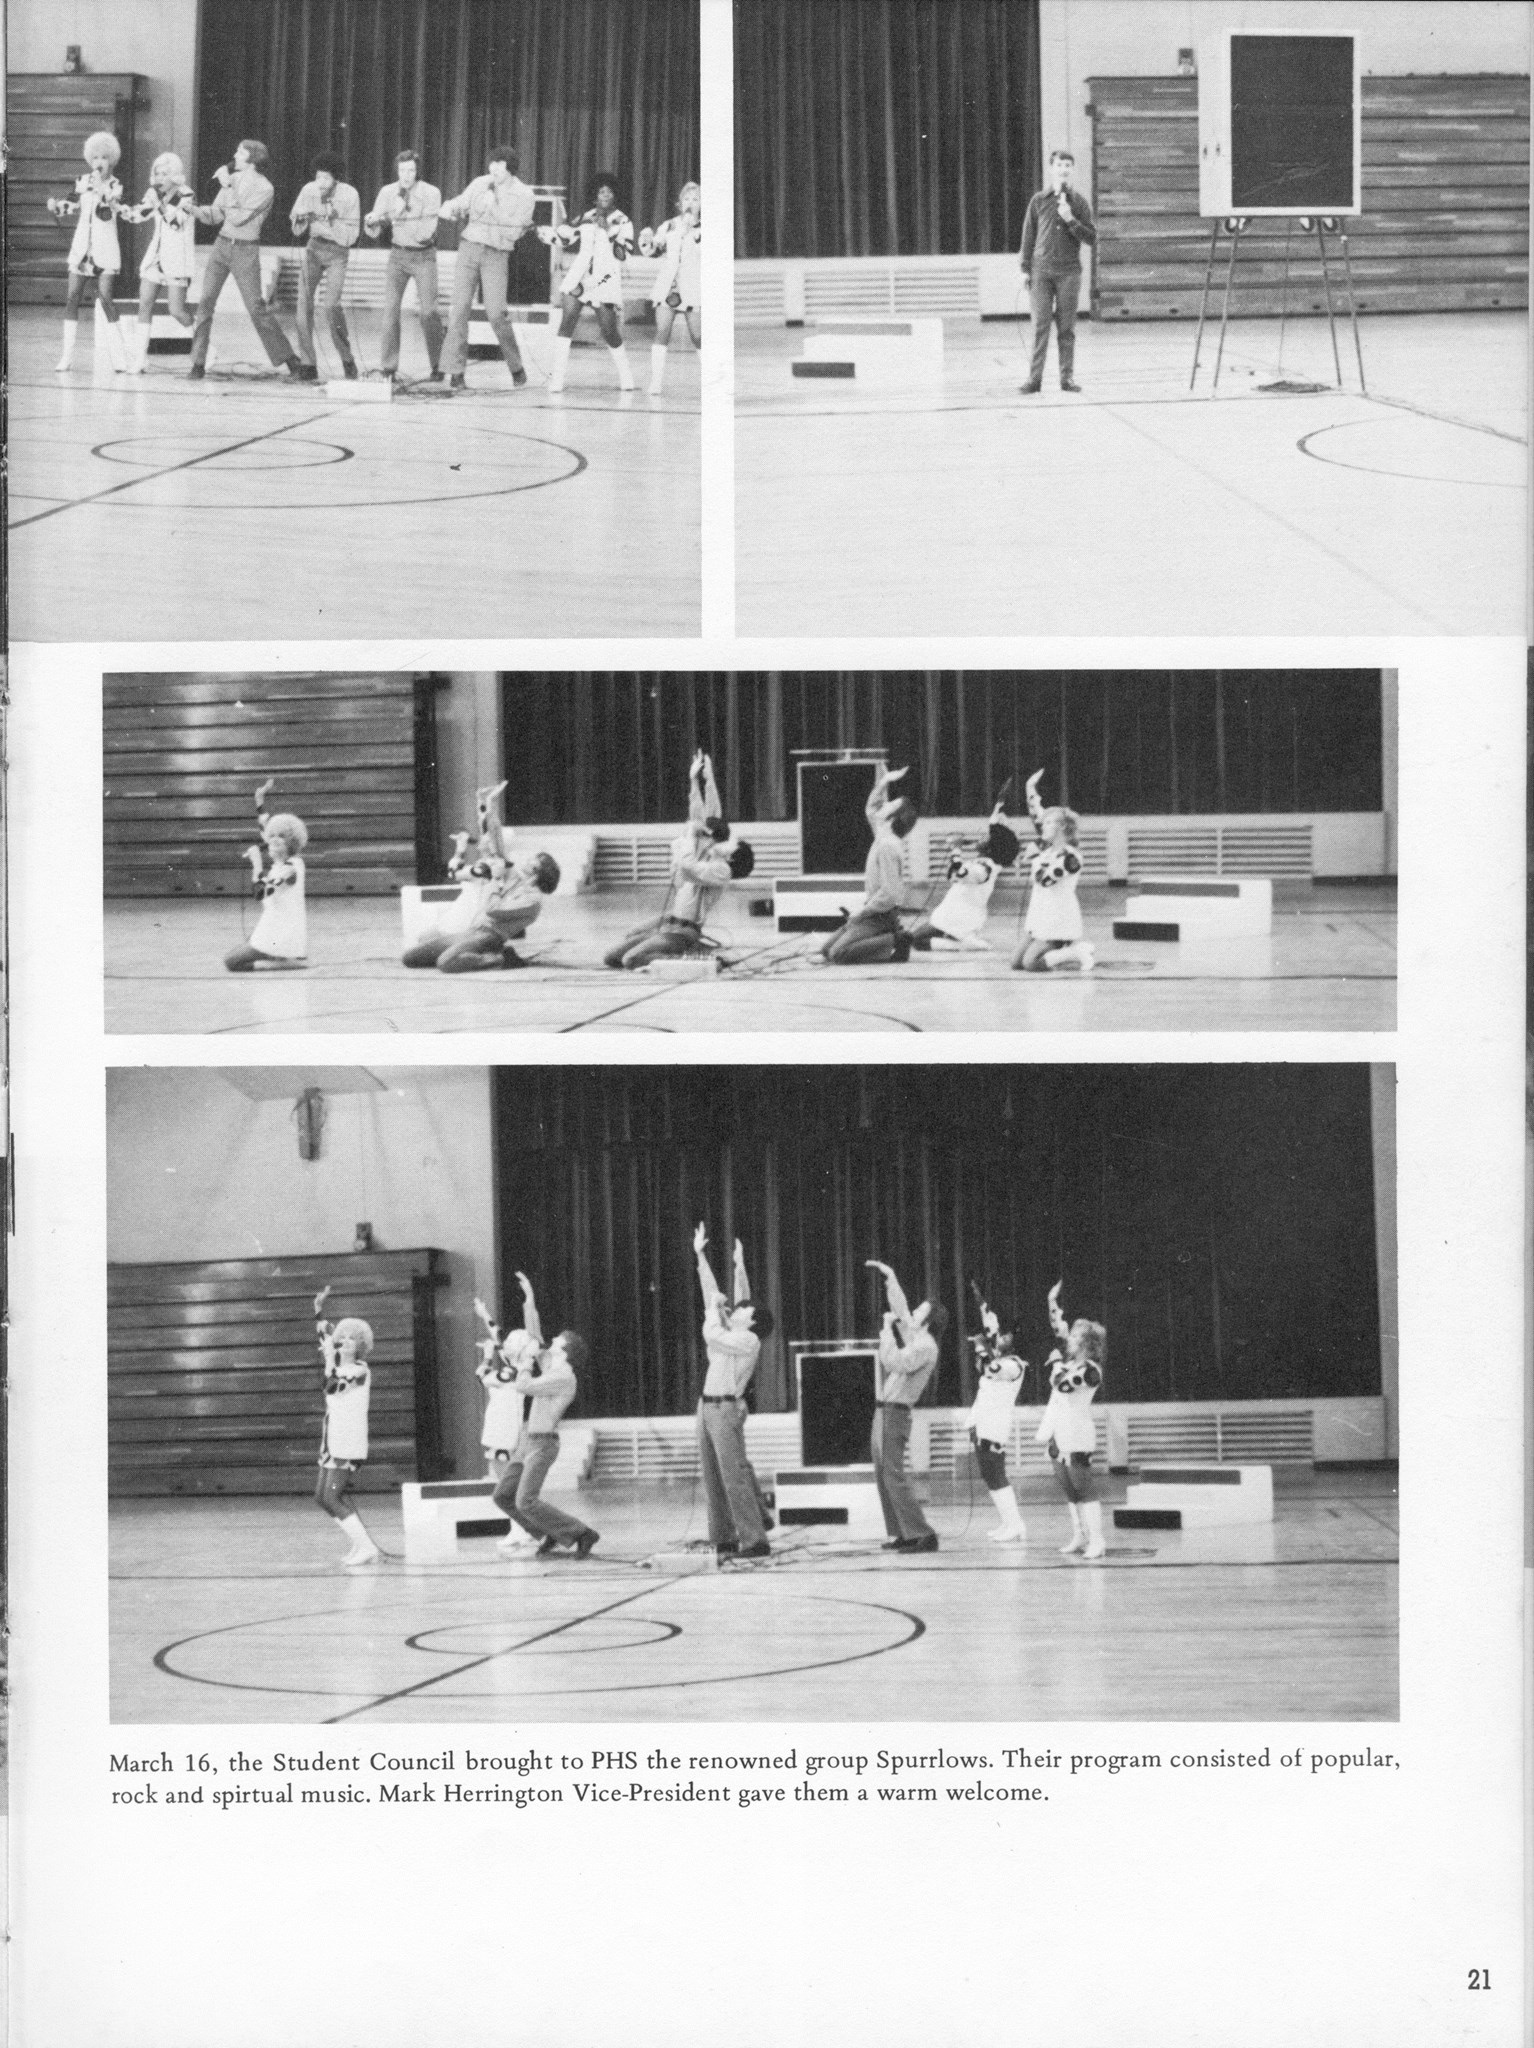 ../../../Images/Large/1971/Arclight-1971-pg0021.jpg